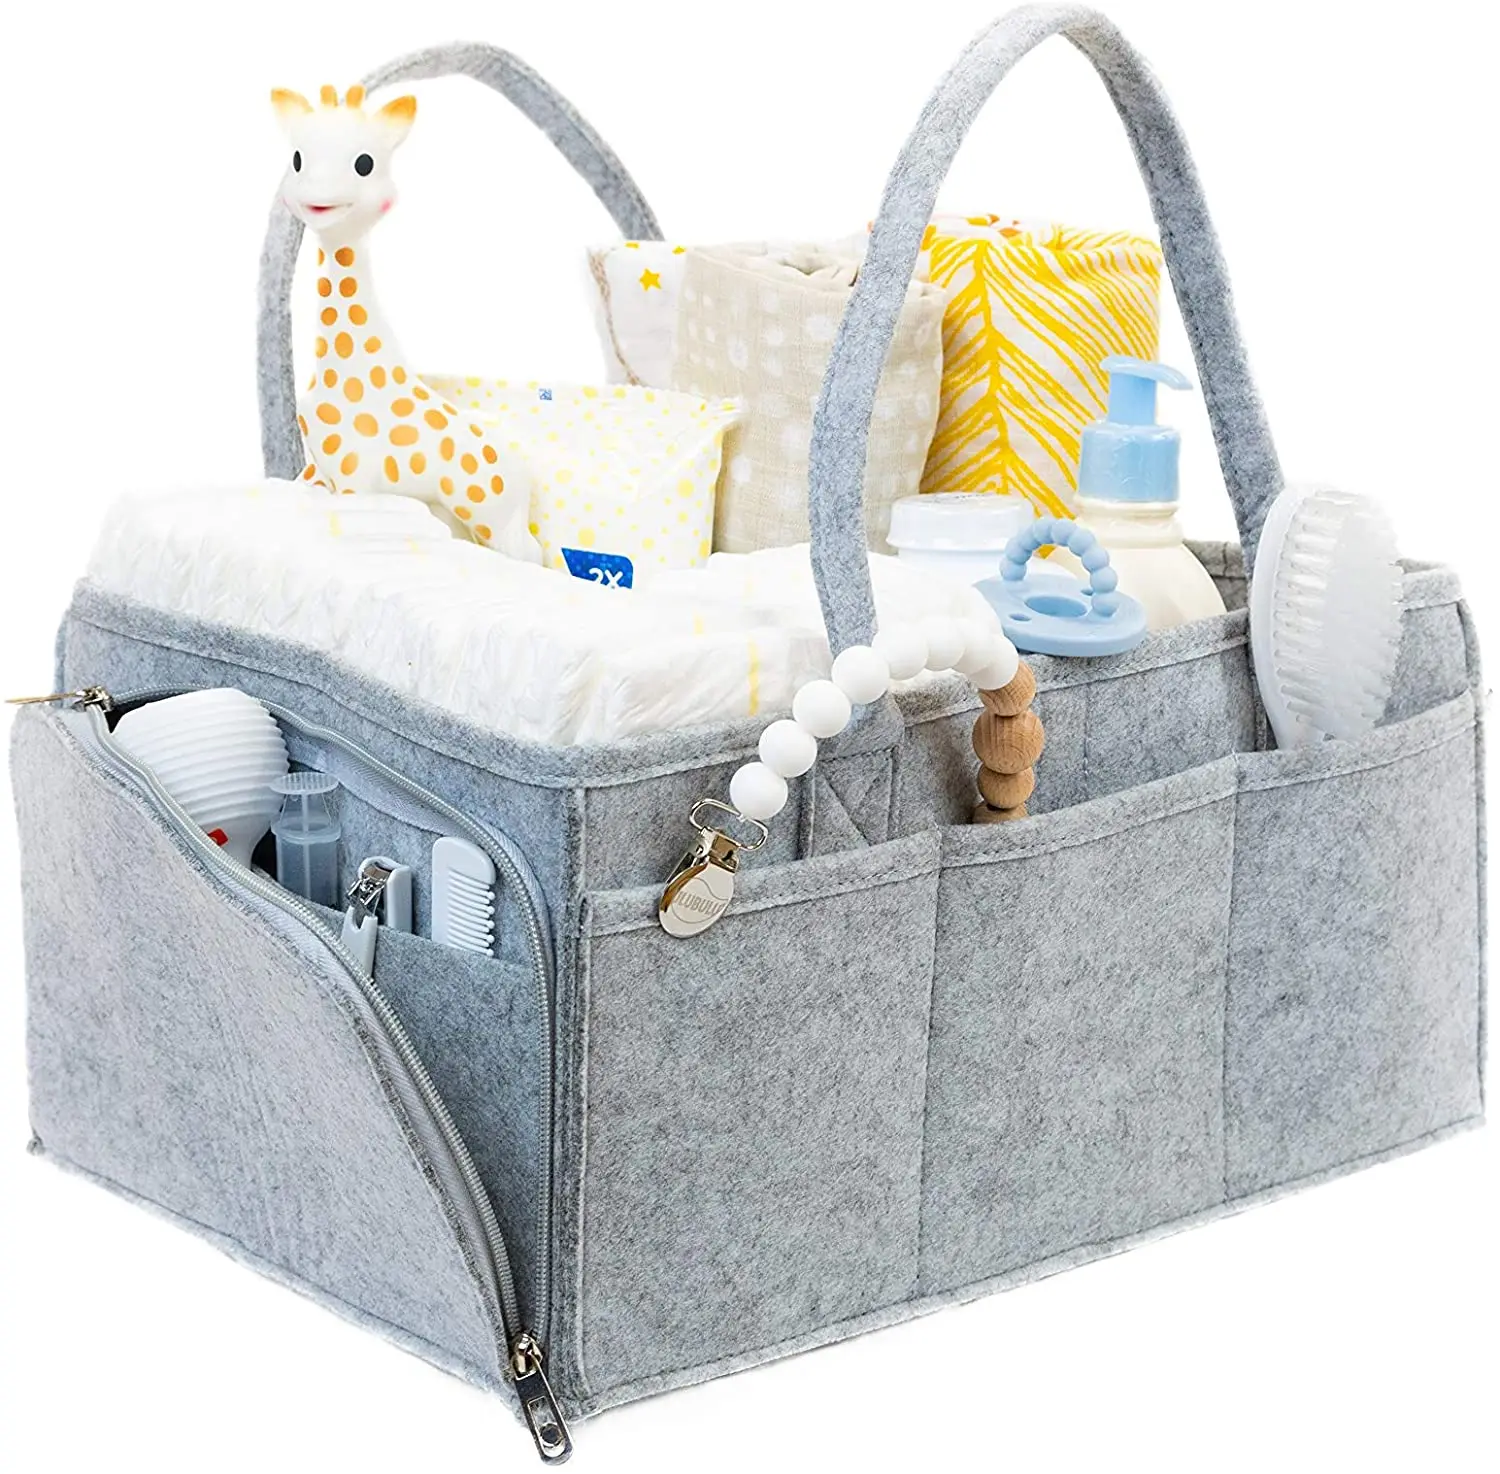 What to Put in a Baby Diaper Caddy: 15+ Must-Have Items